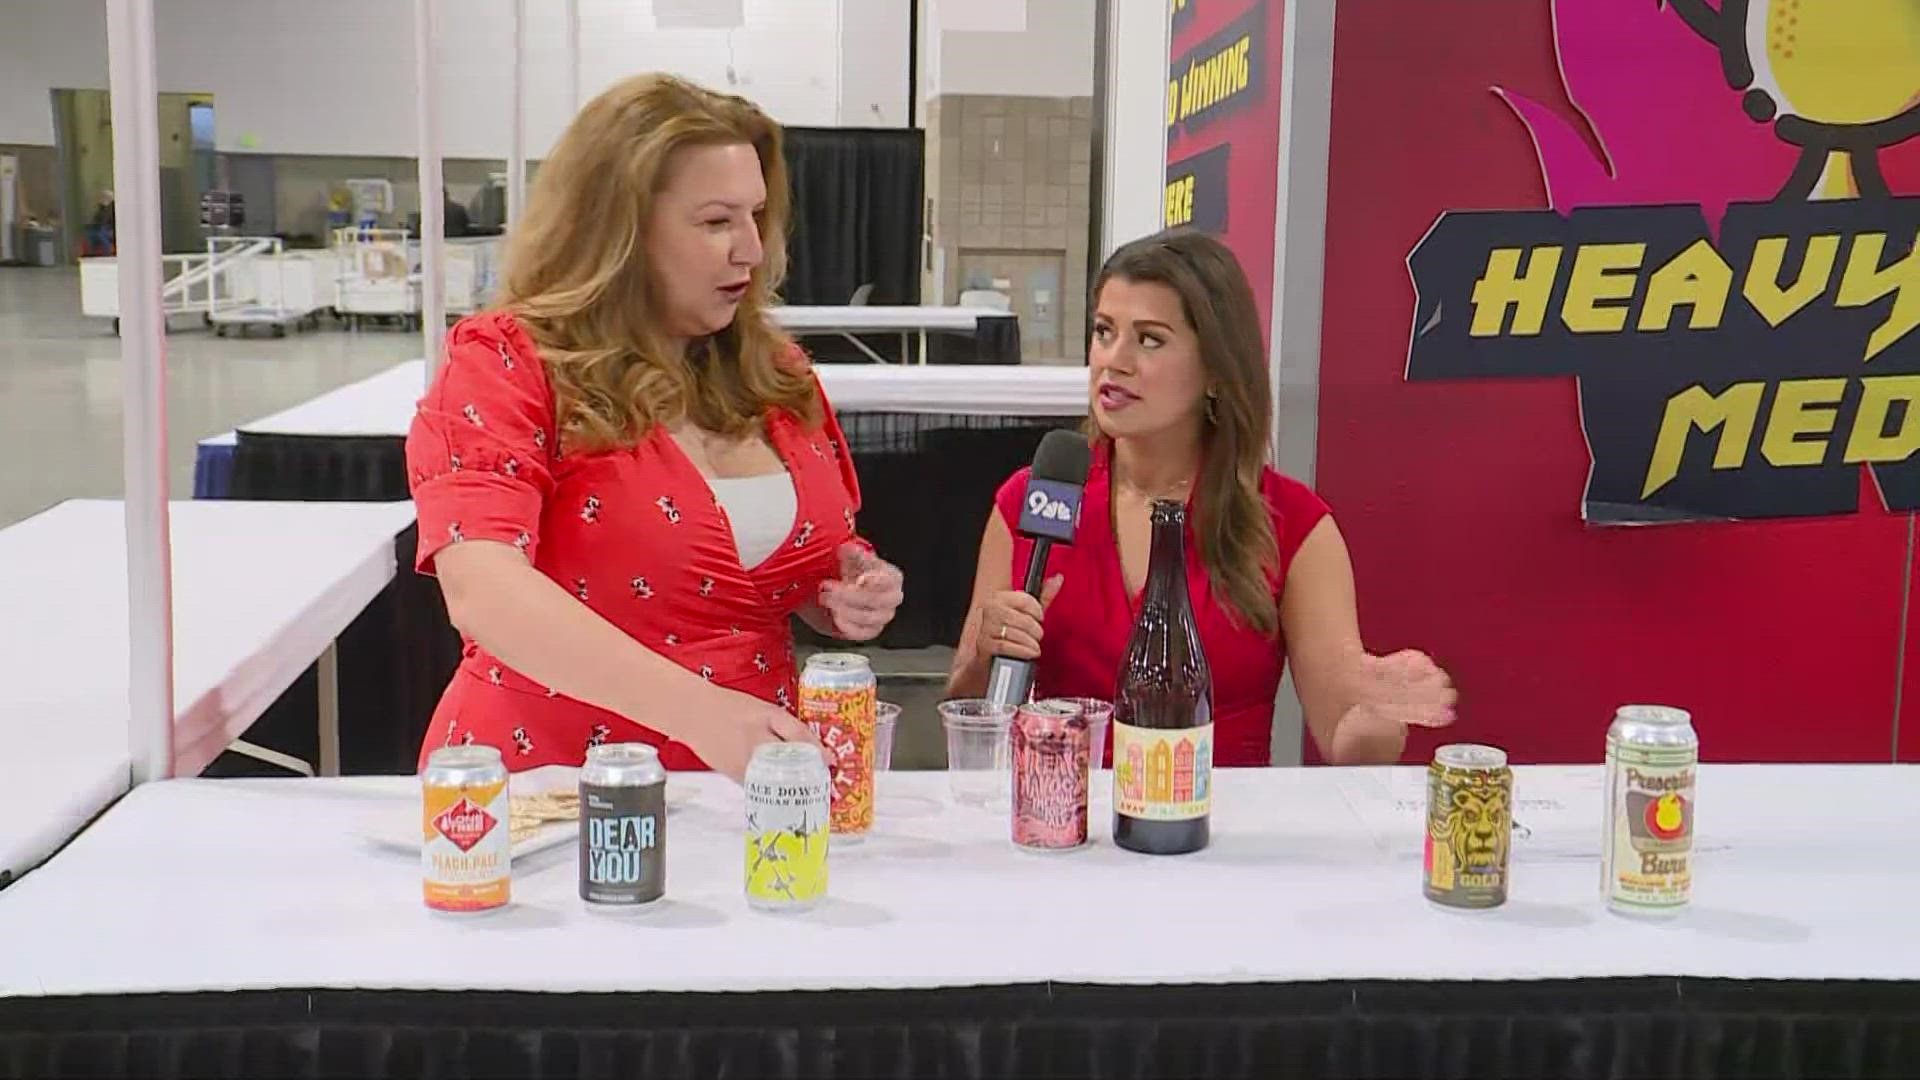 Erica Lopez catches up with Melissa Cole, who will help judge the Great American Beer Festival's prestigious beer competition.